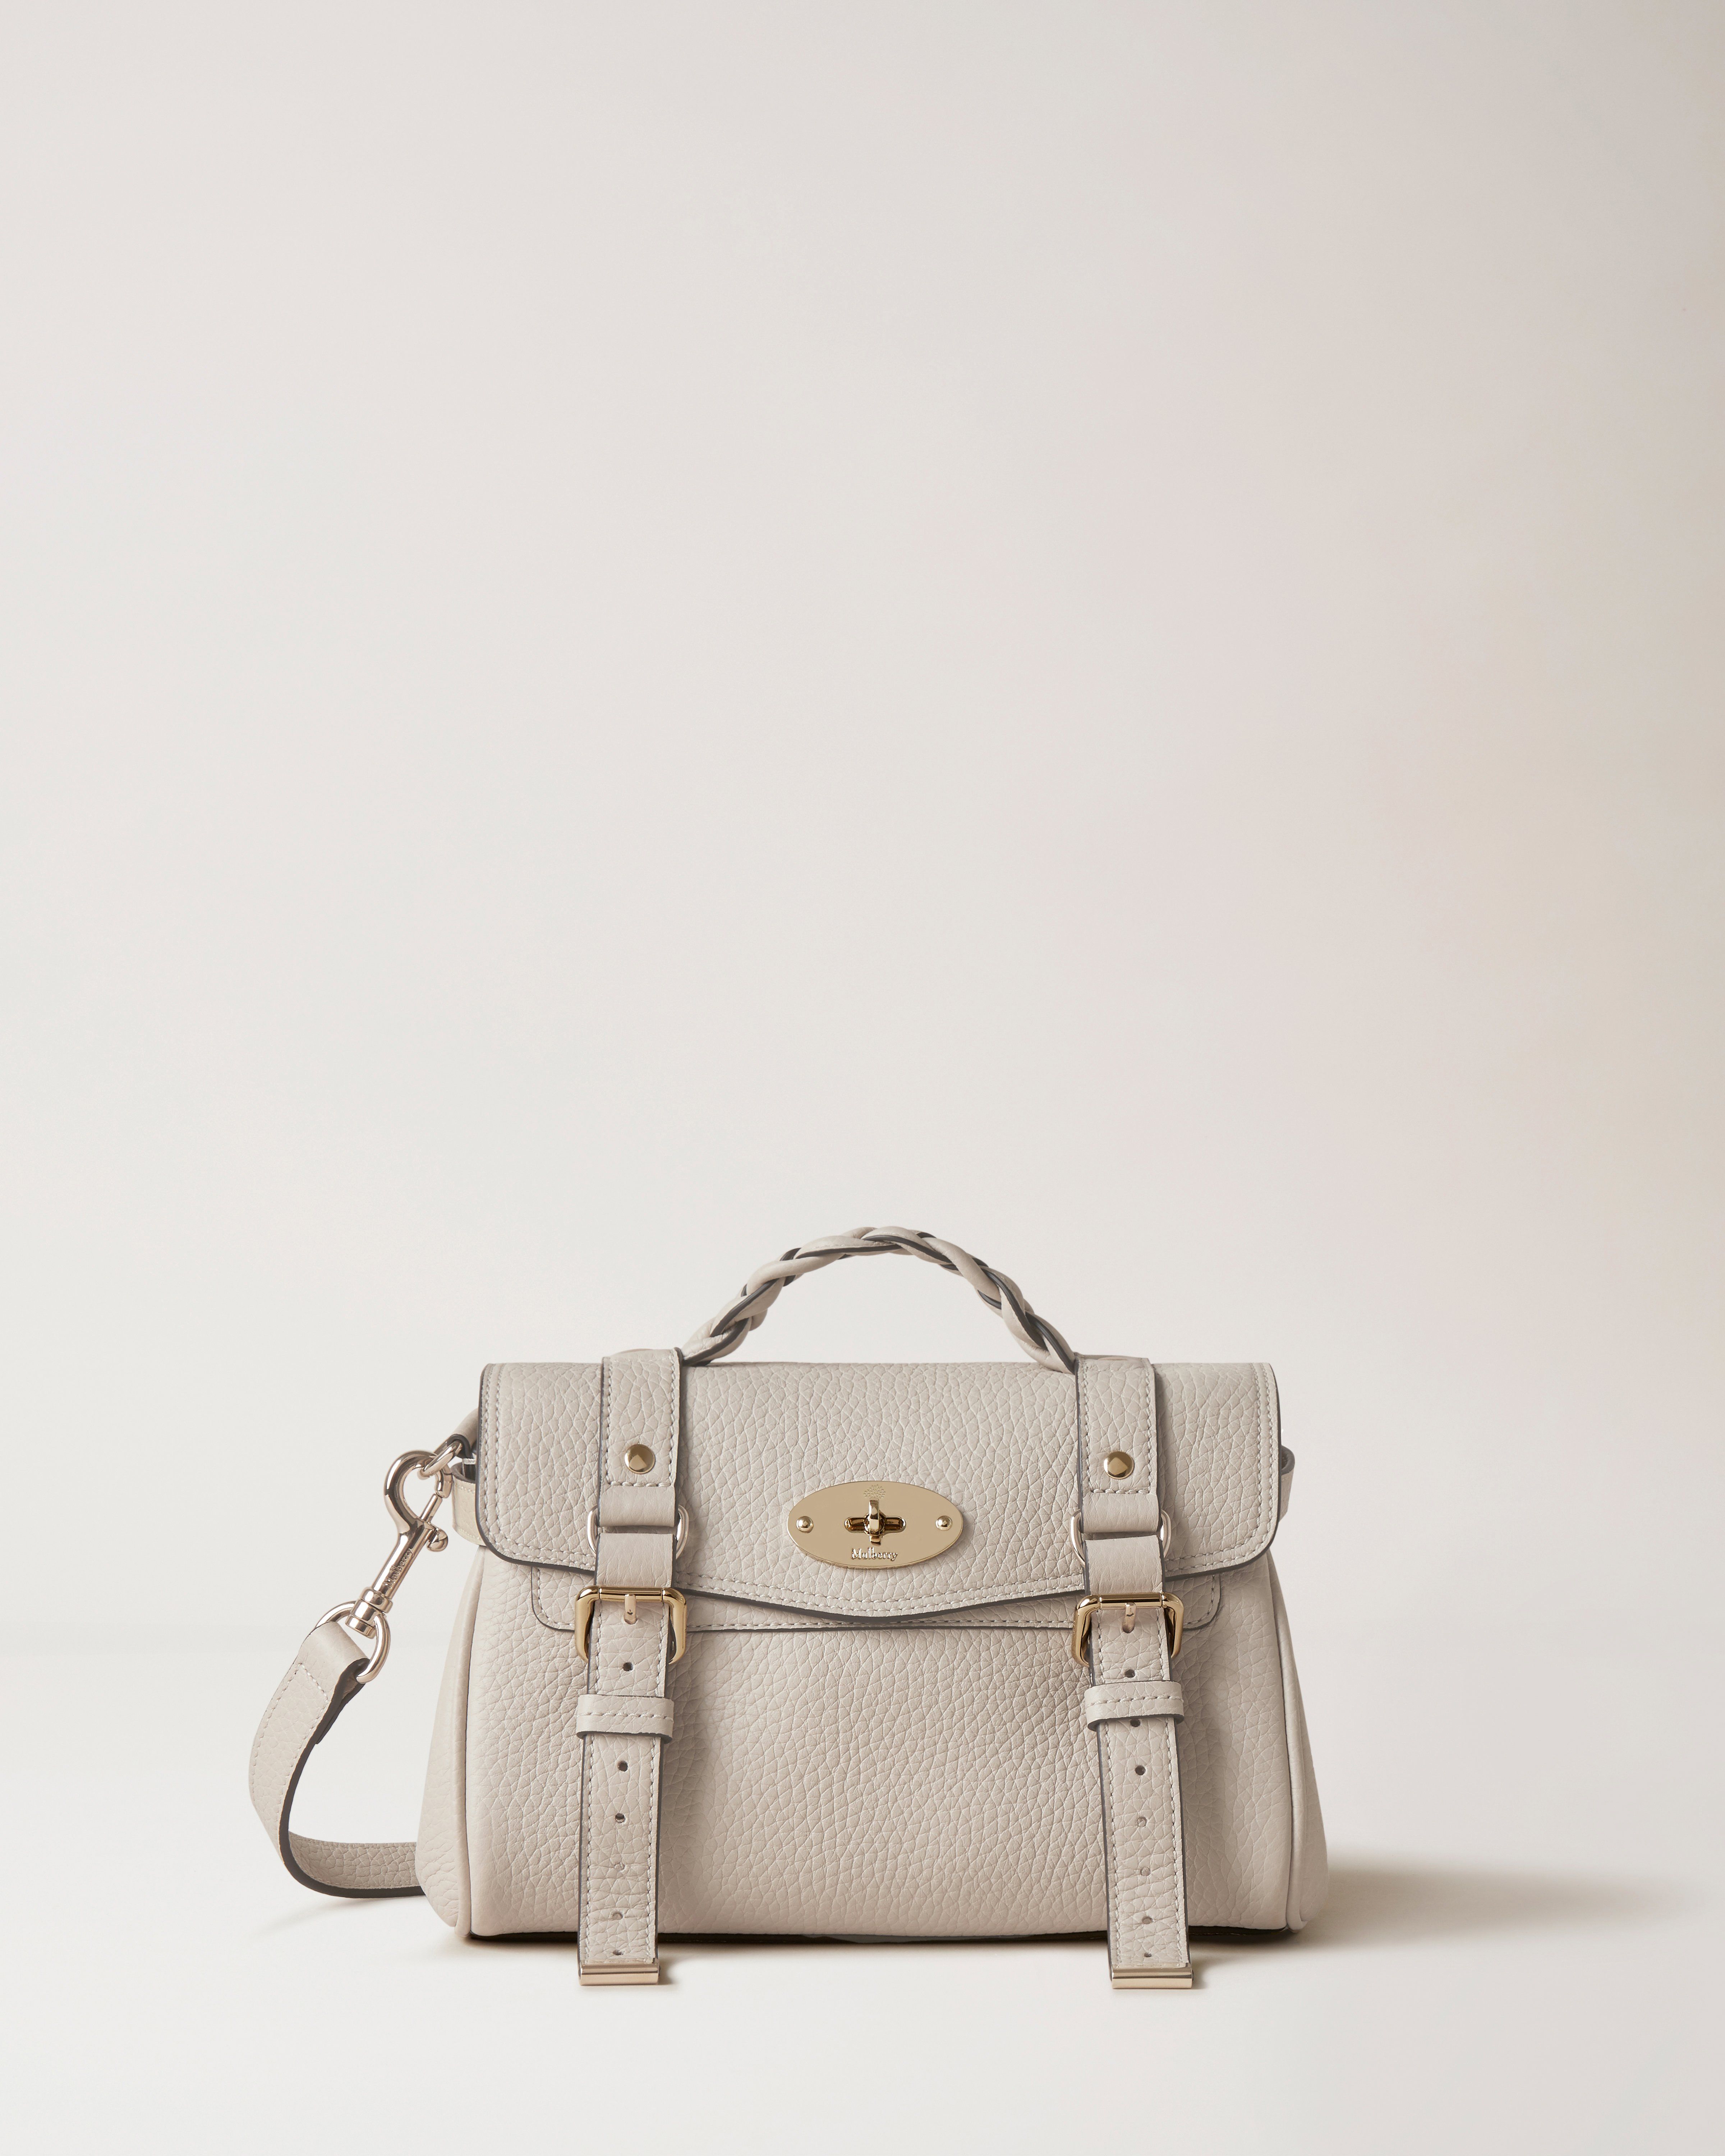 The Mulberry Alexa Is Back! - BagAddicts Anonymous